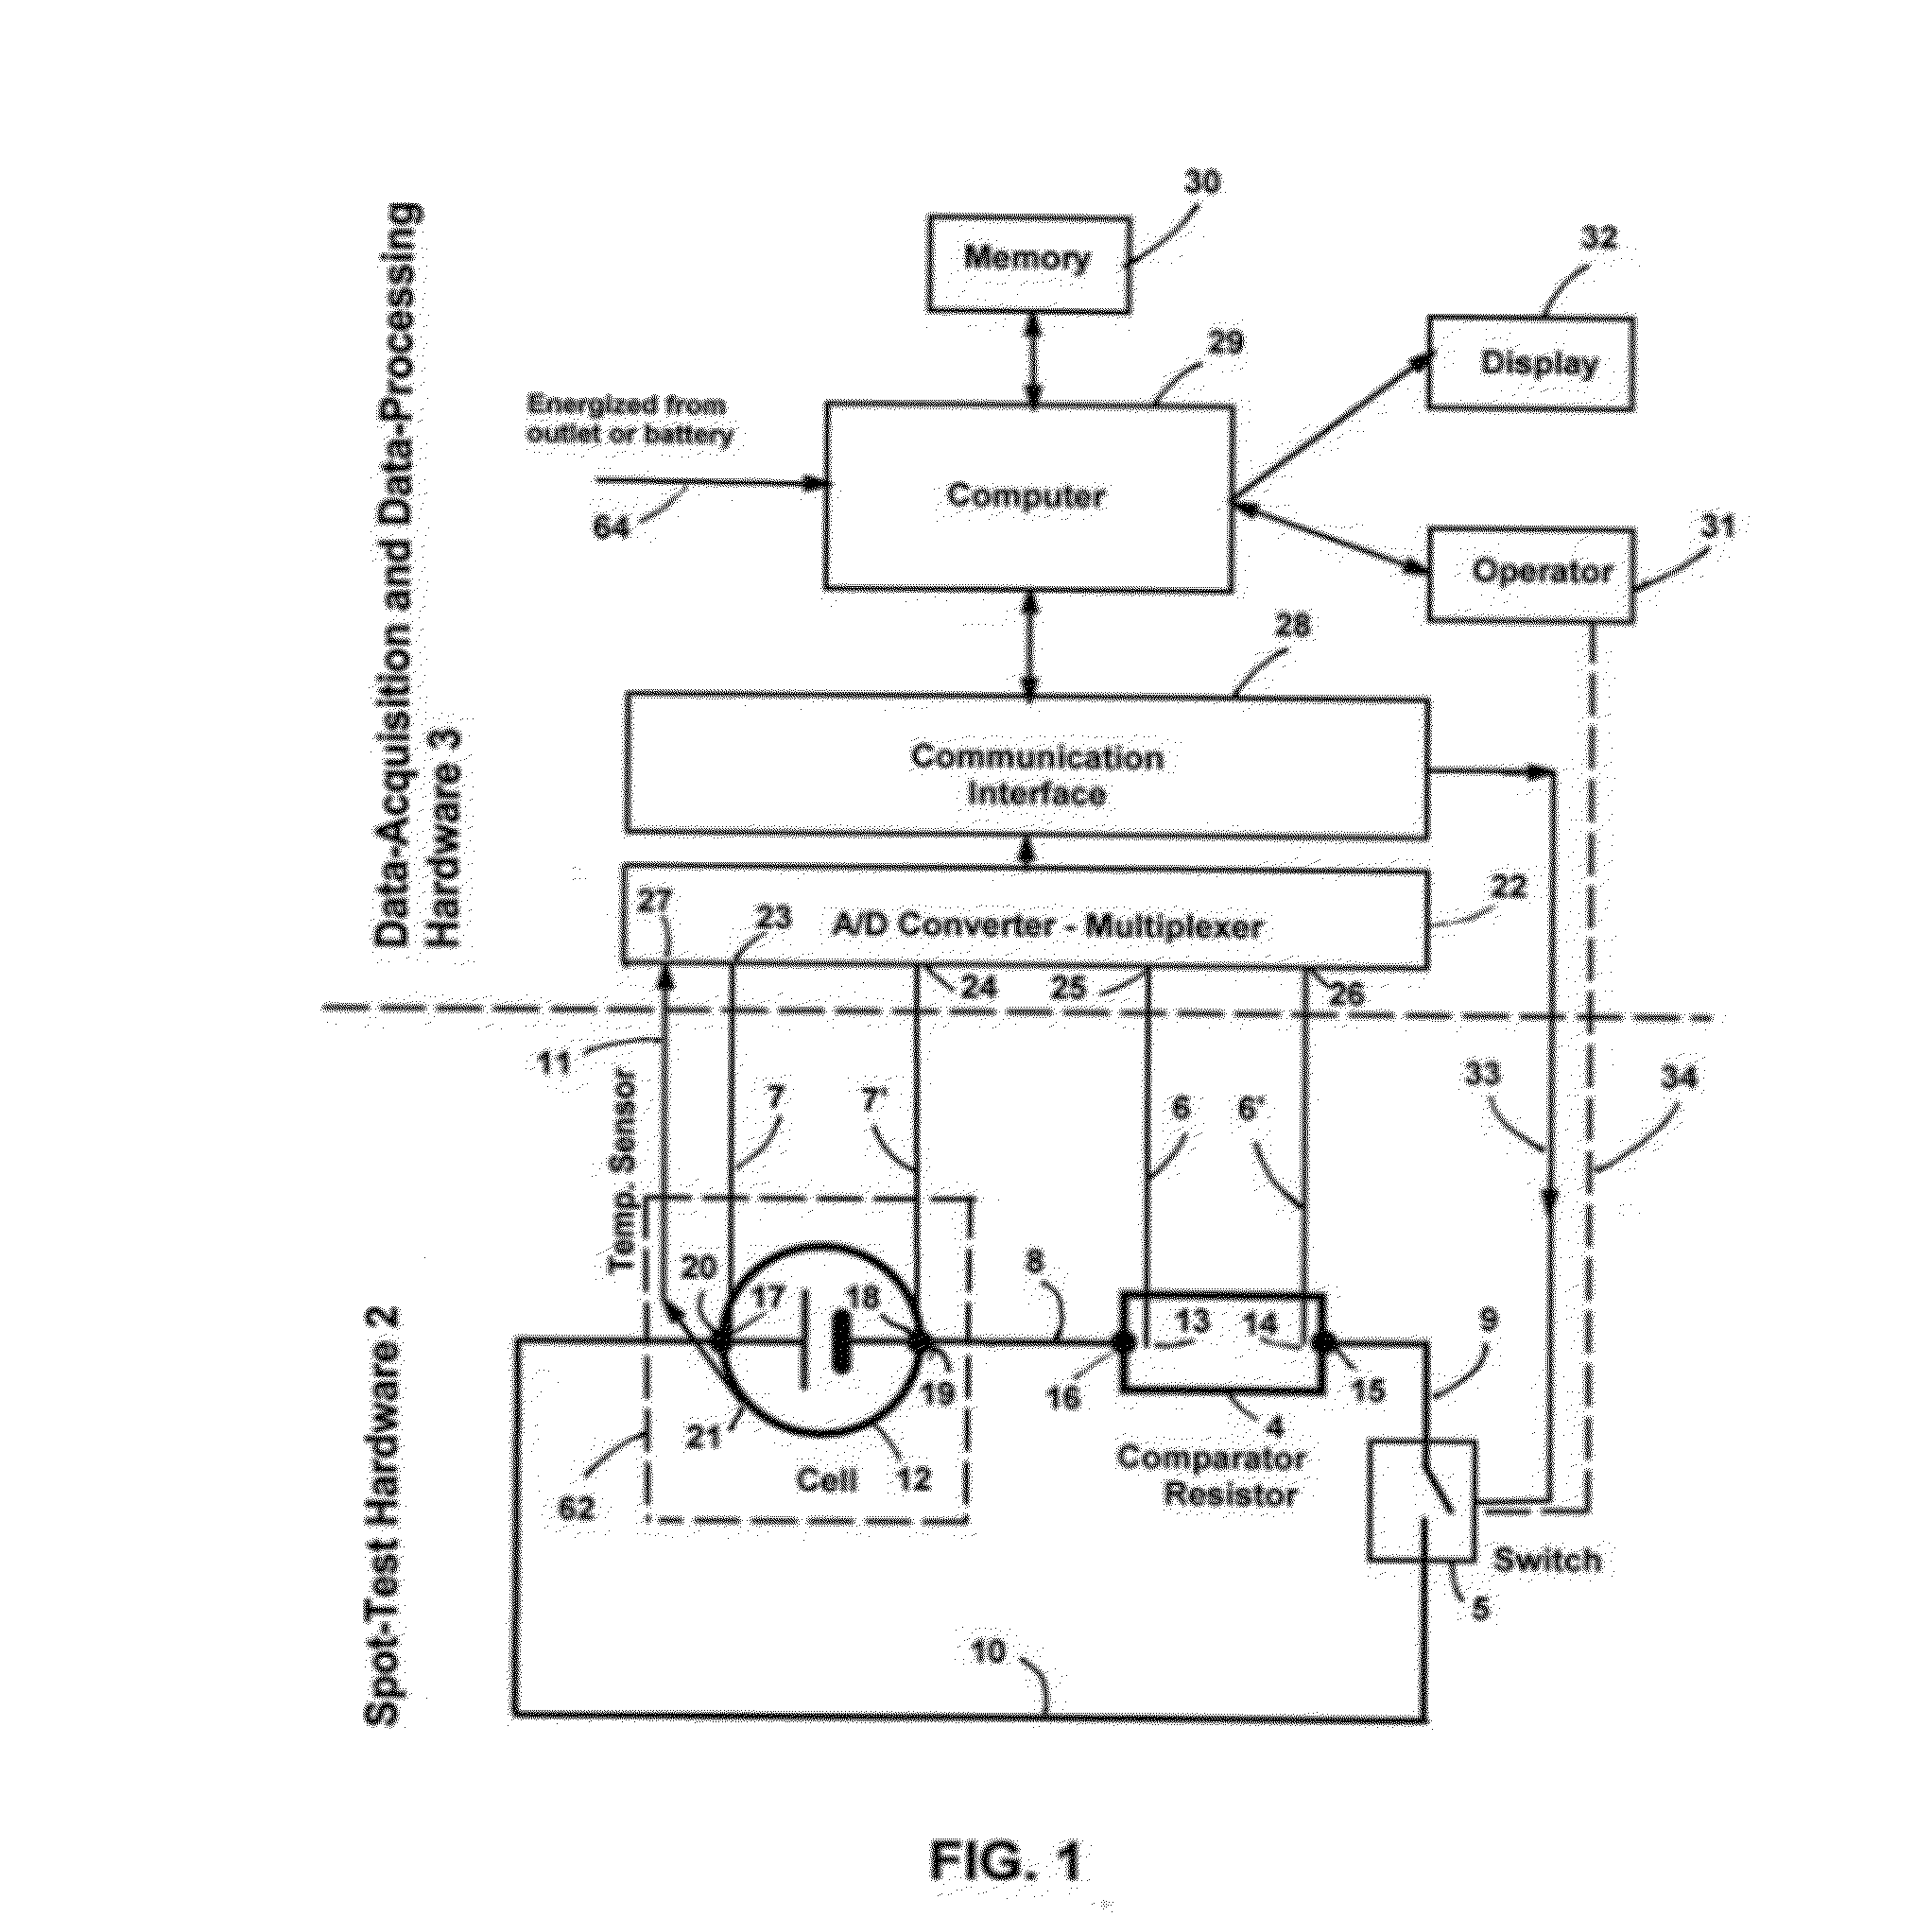 Apparatus and method for determining battery/cell's performance, age, and health